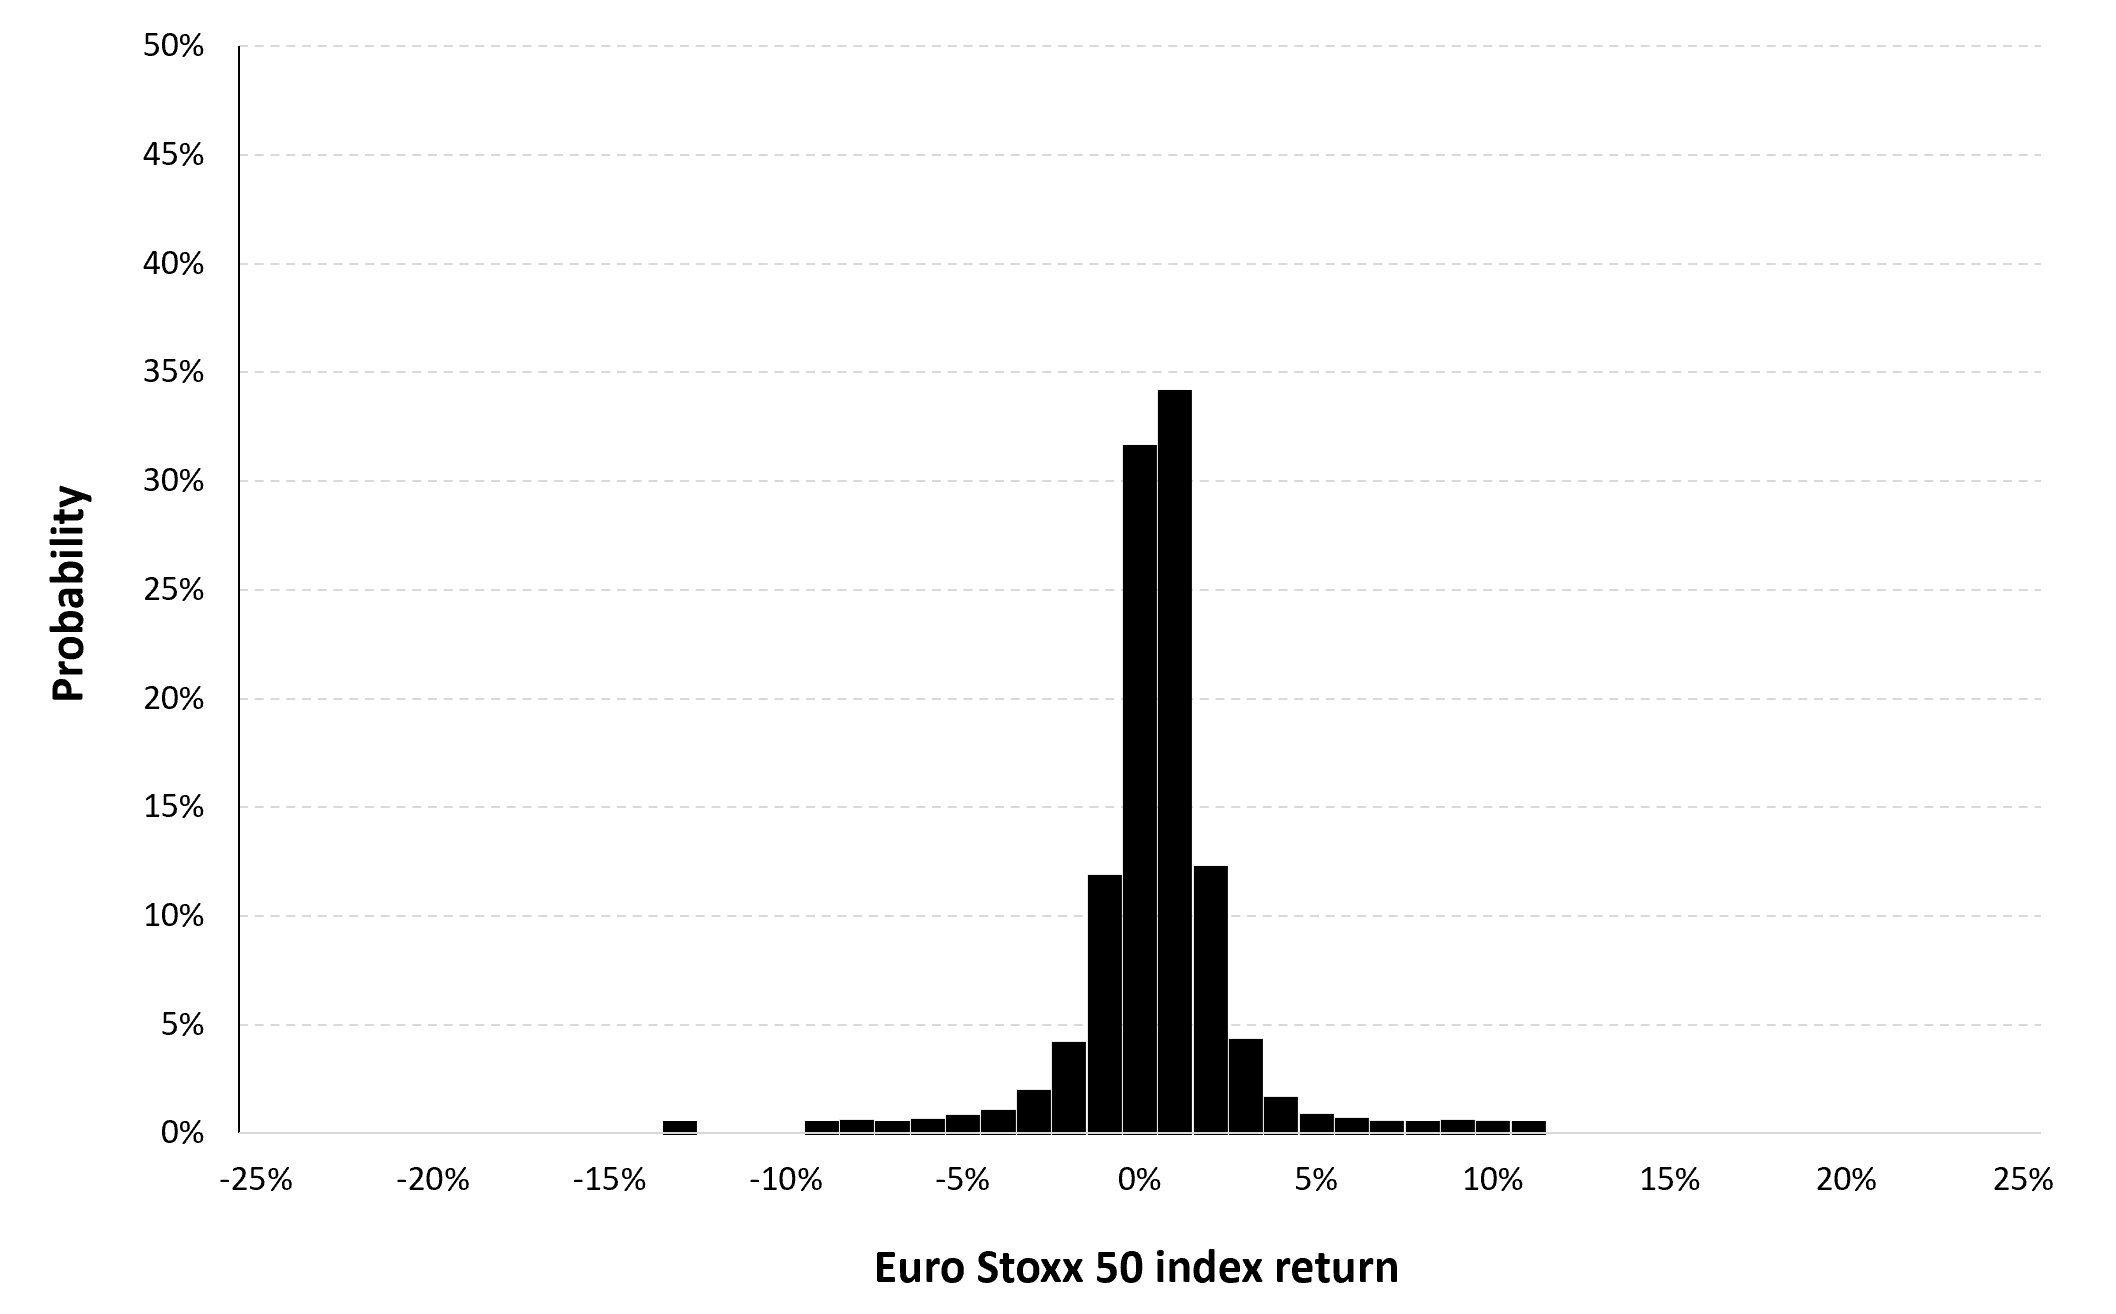 Historical distribution of the daily Euro Stoxx 50 index returns